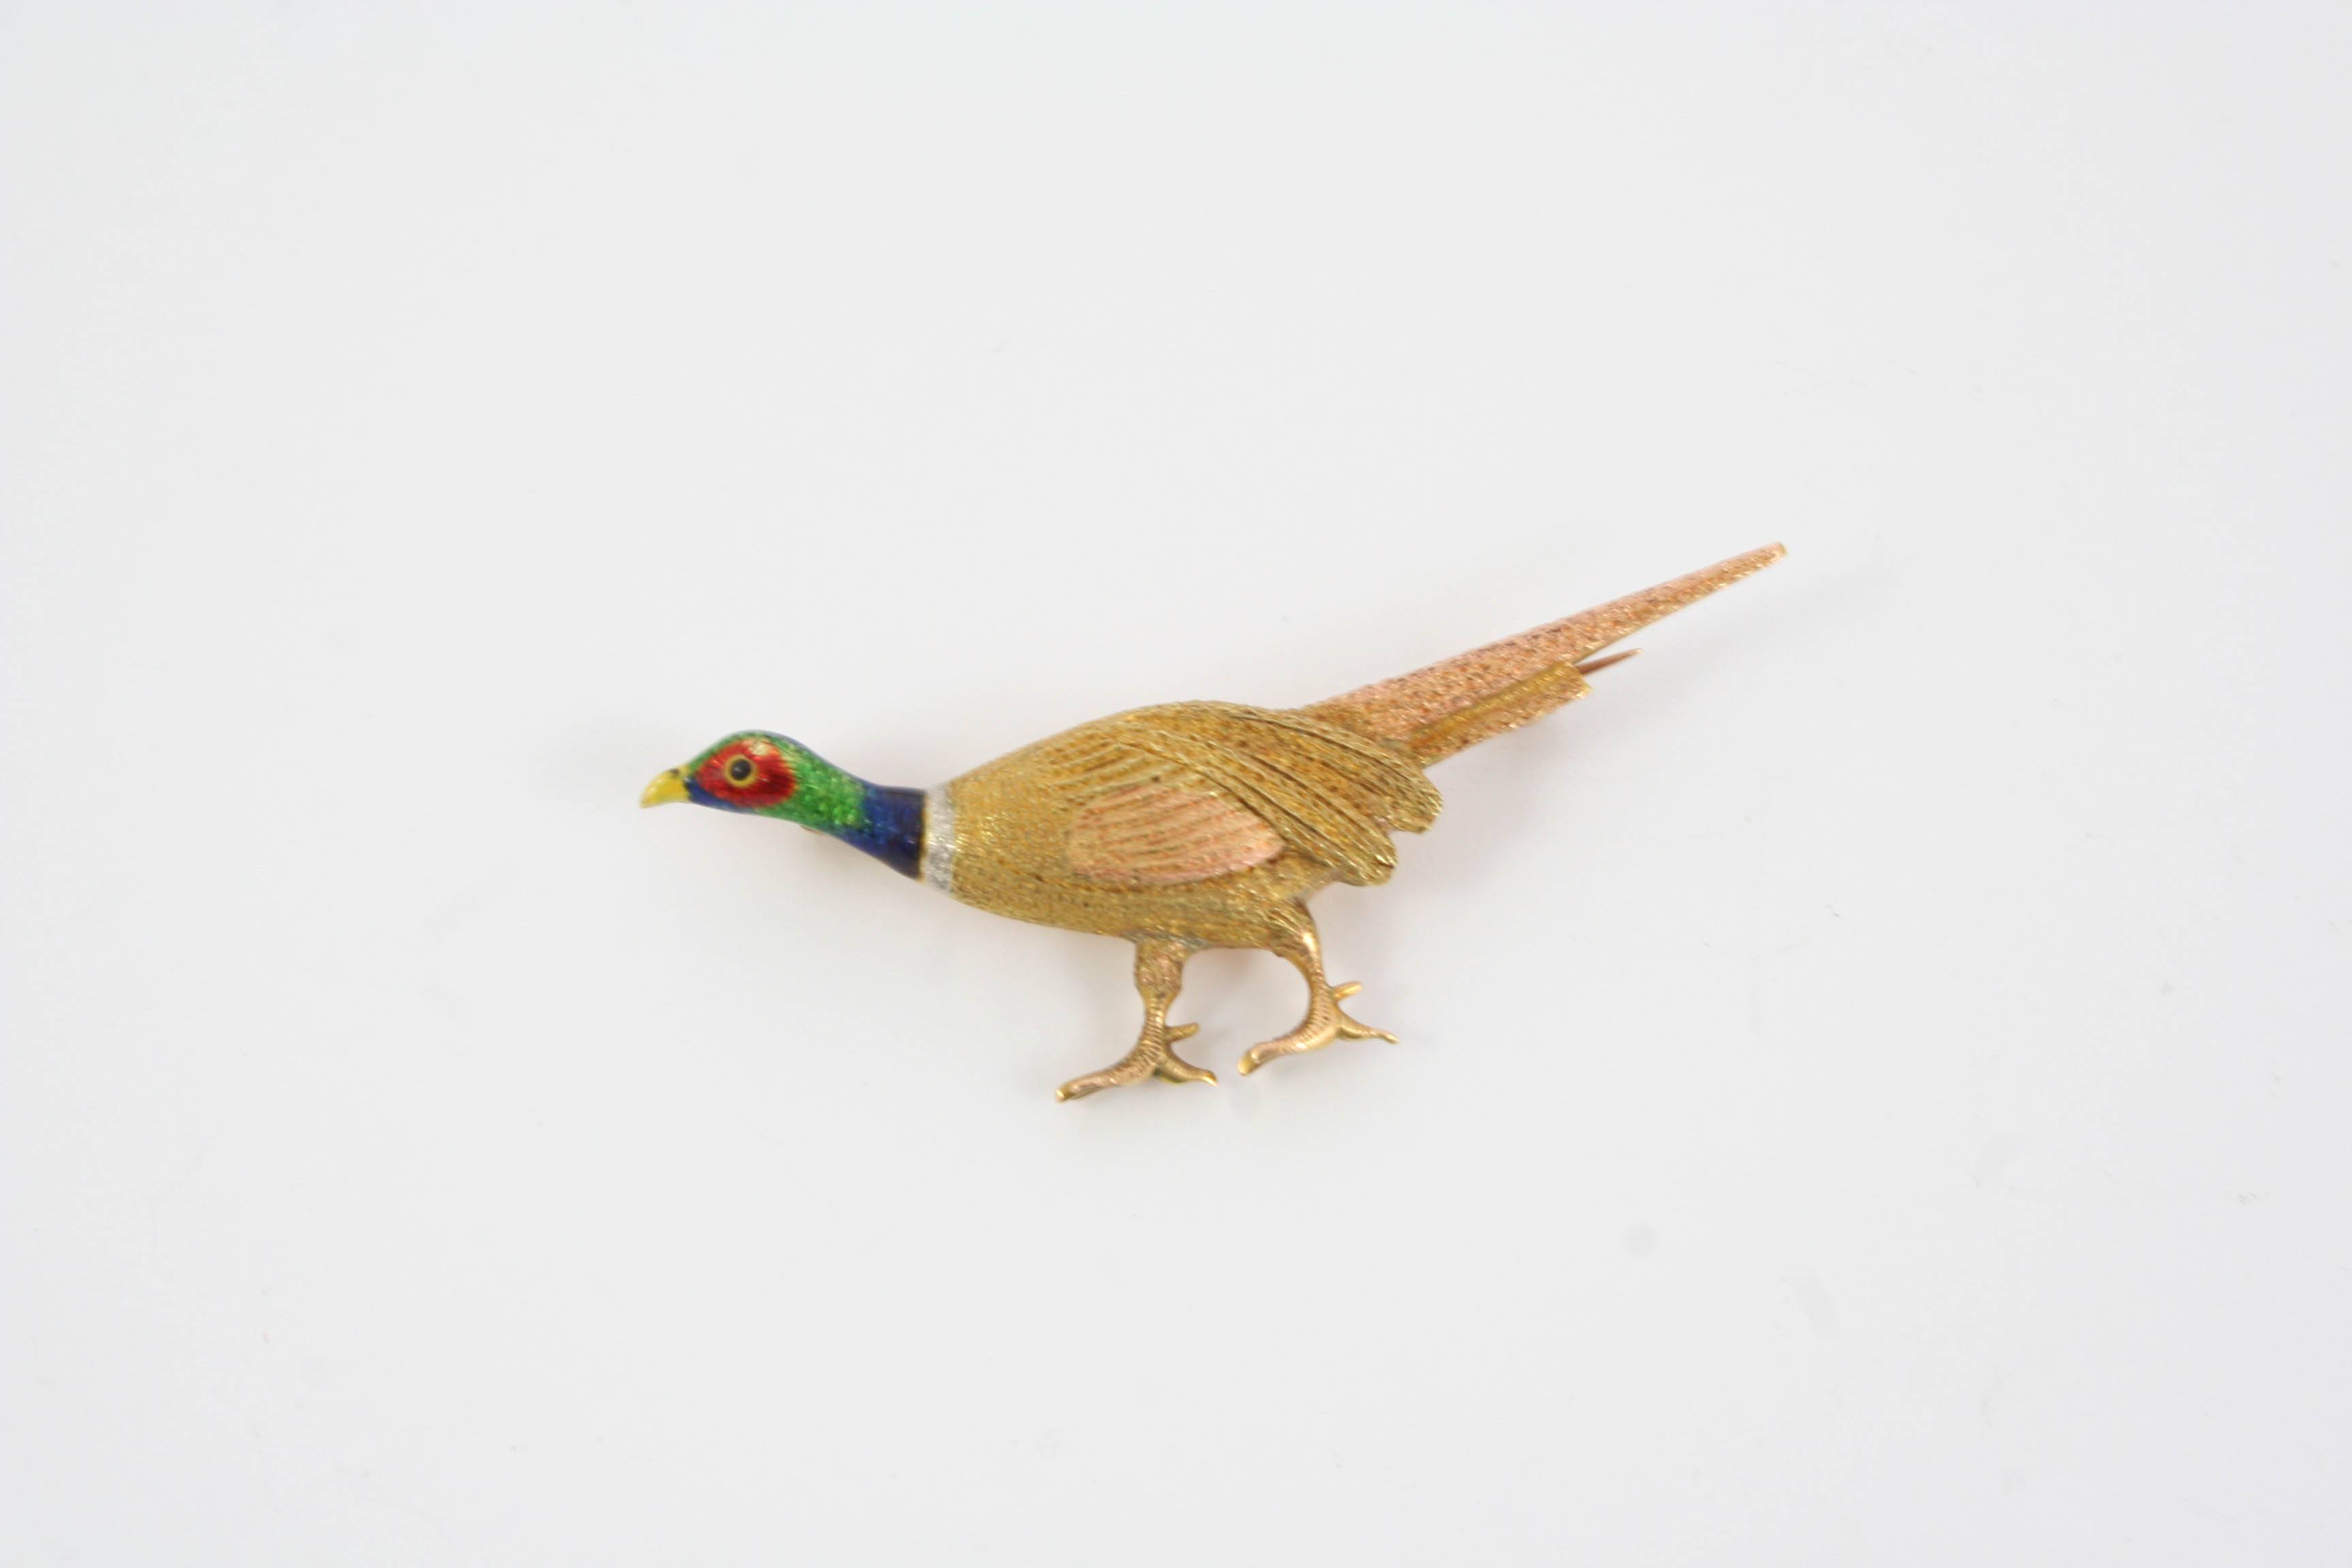 AN ENAMEL AND 15CT. GOLD PHEASANT BROOCH realistically formed, the head with green, blue and red